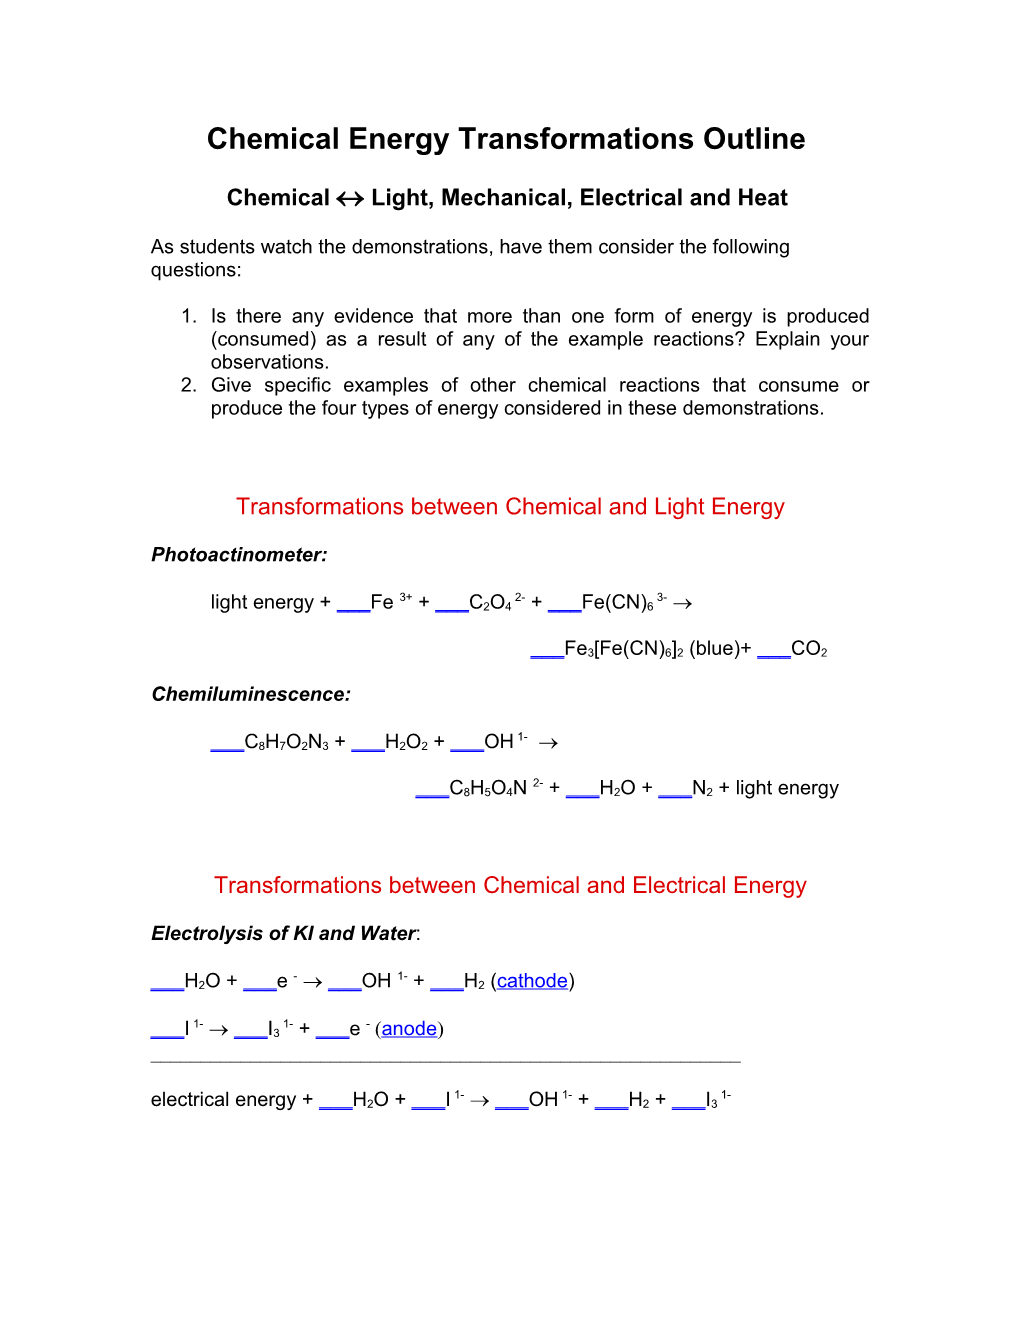 Chemical Energy Transformations Outline